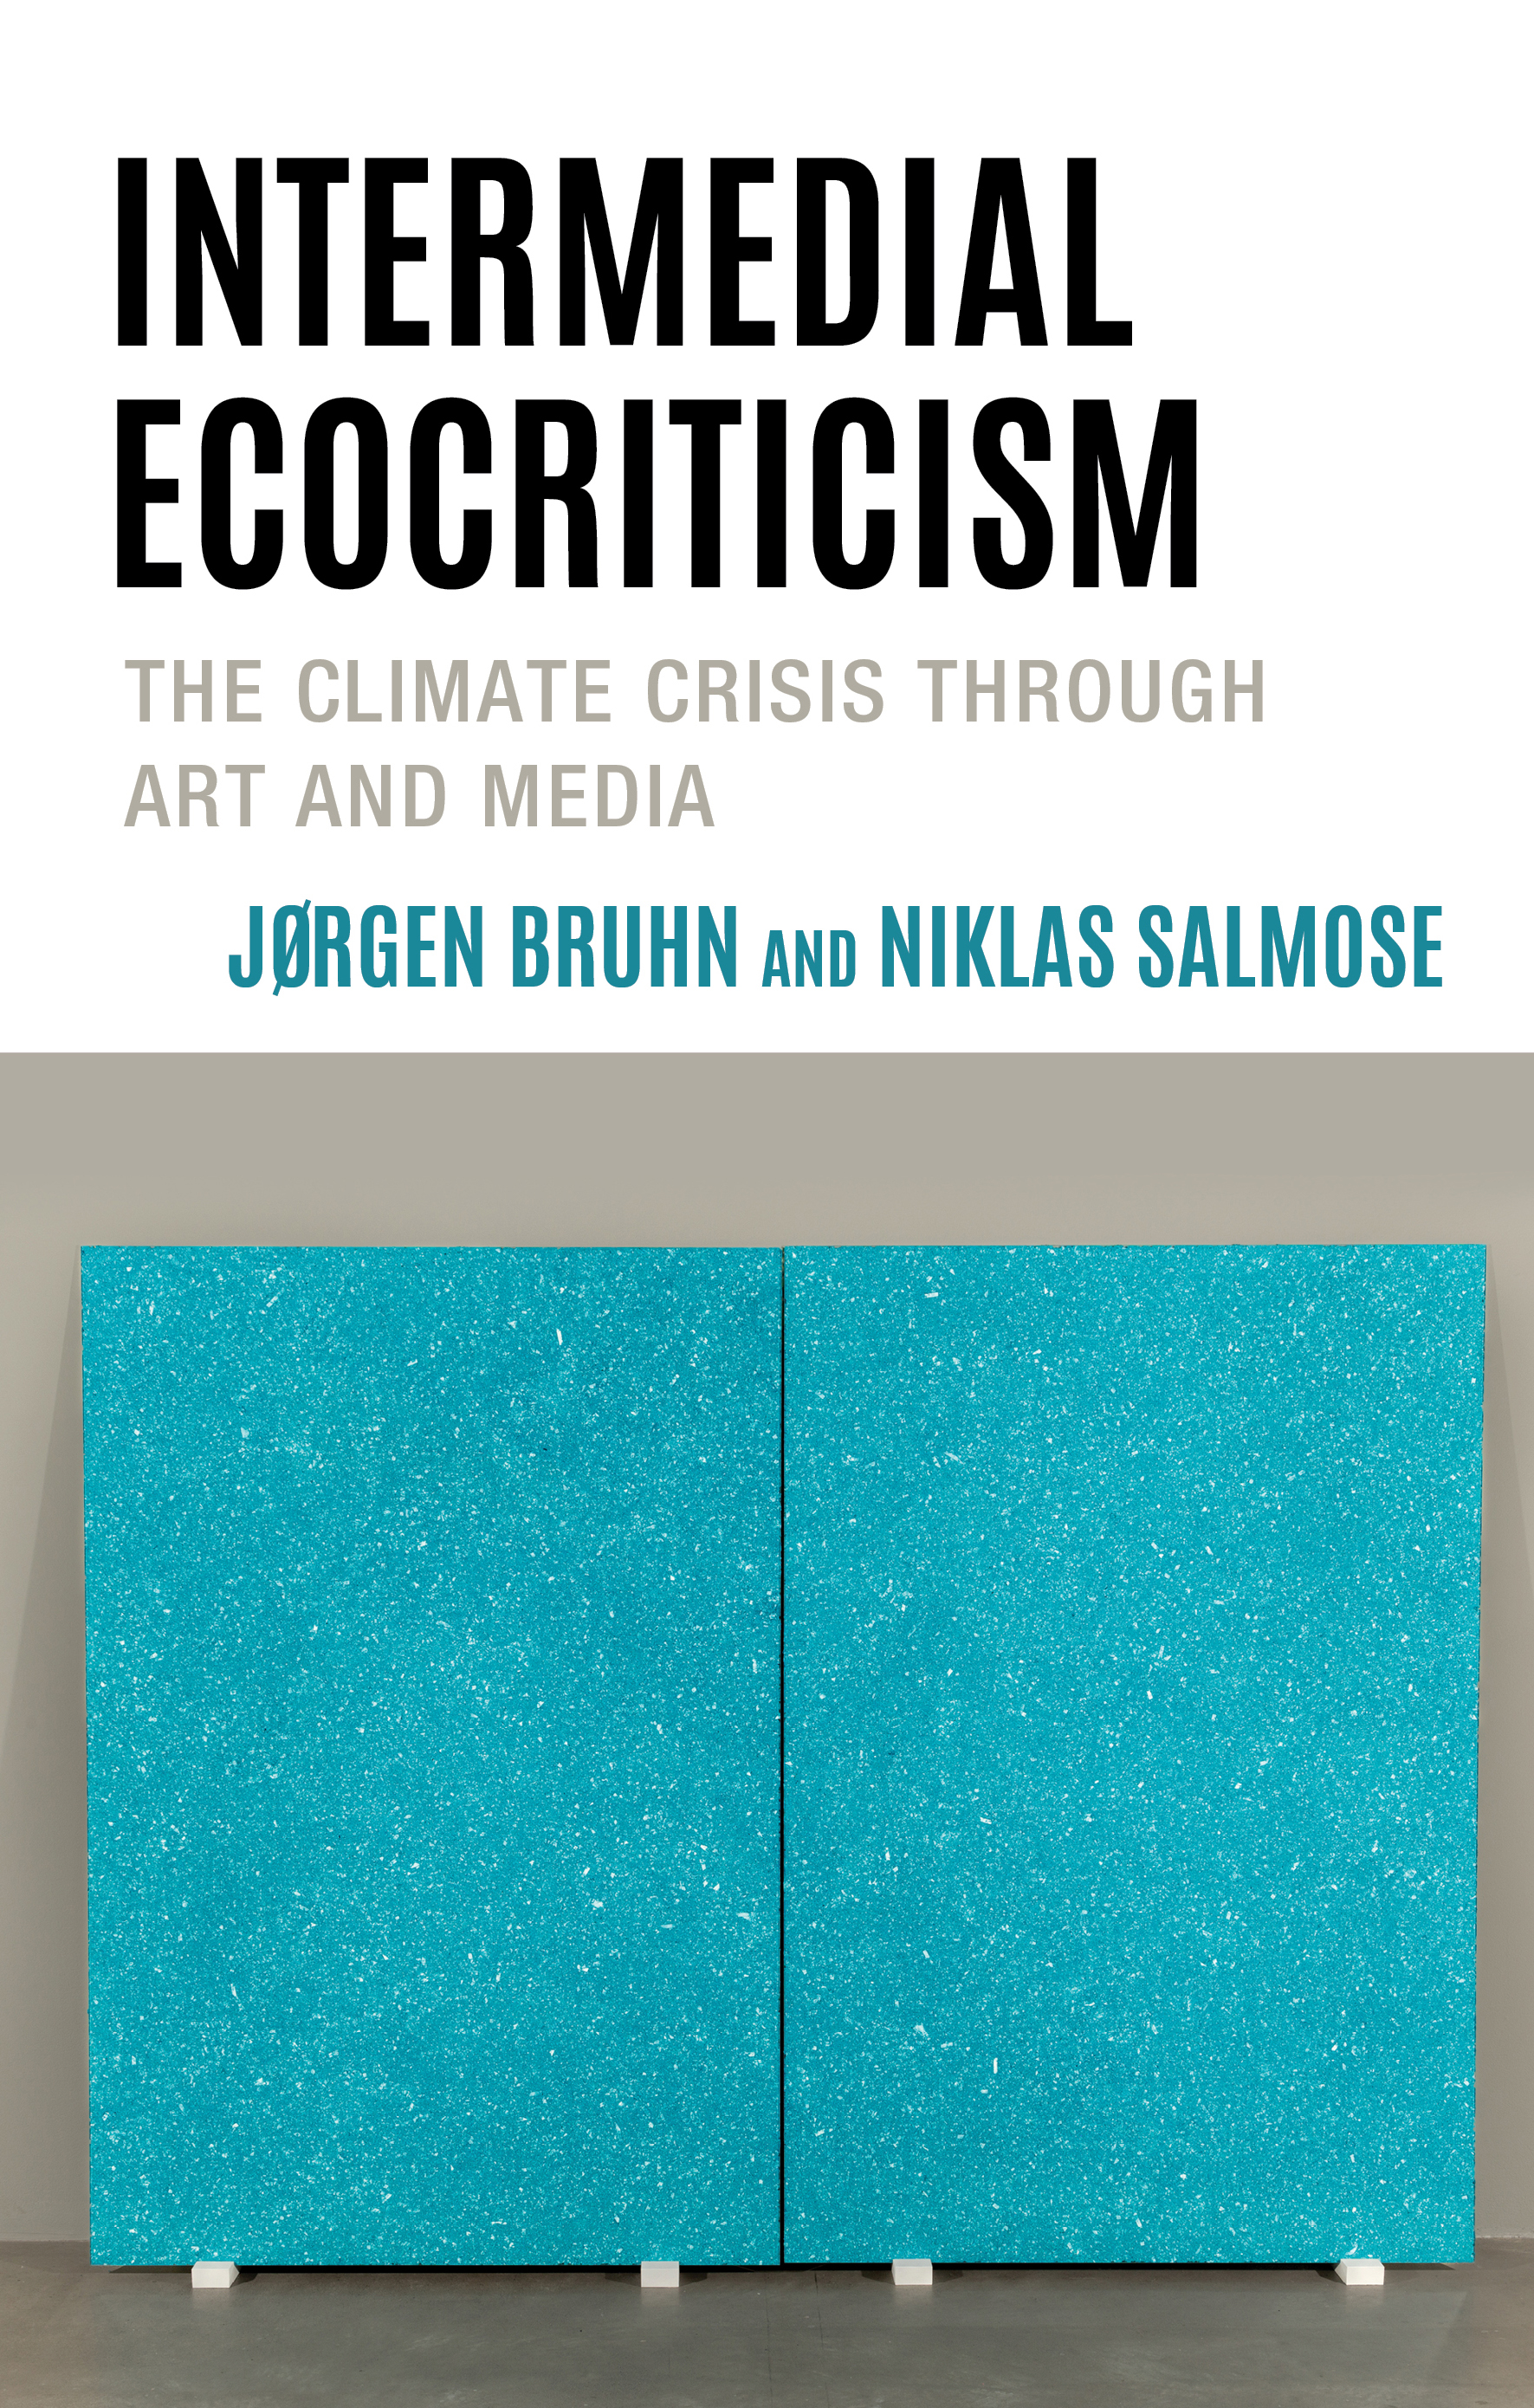 Intermedial Ecocriticism: The Climate Crisis Through Art and Media